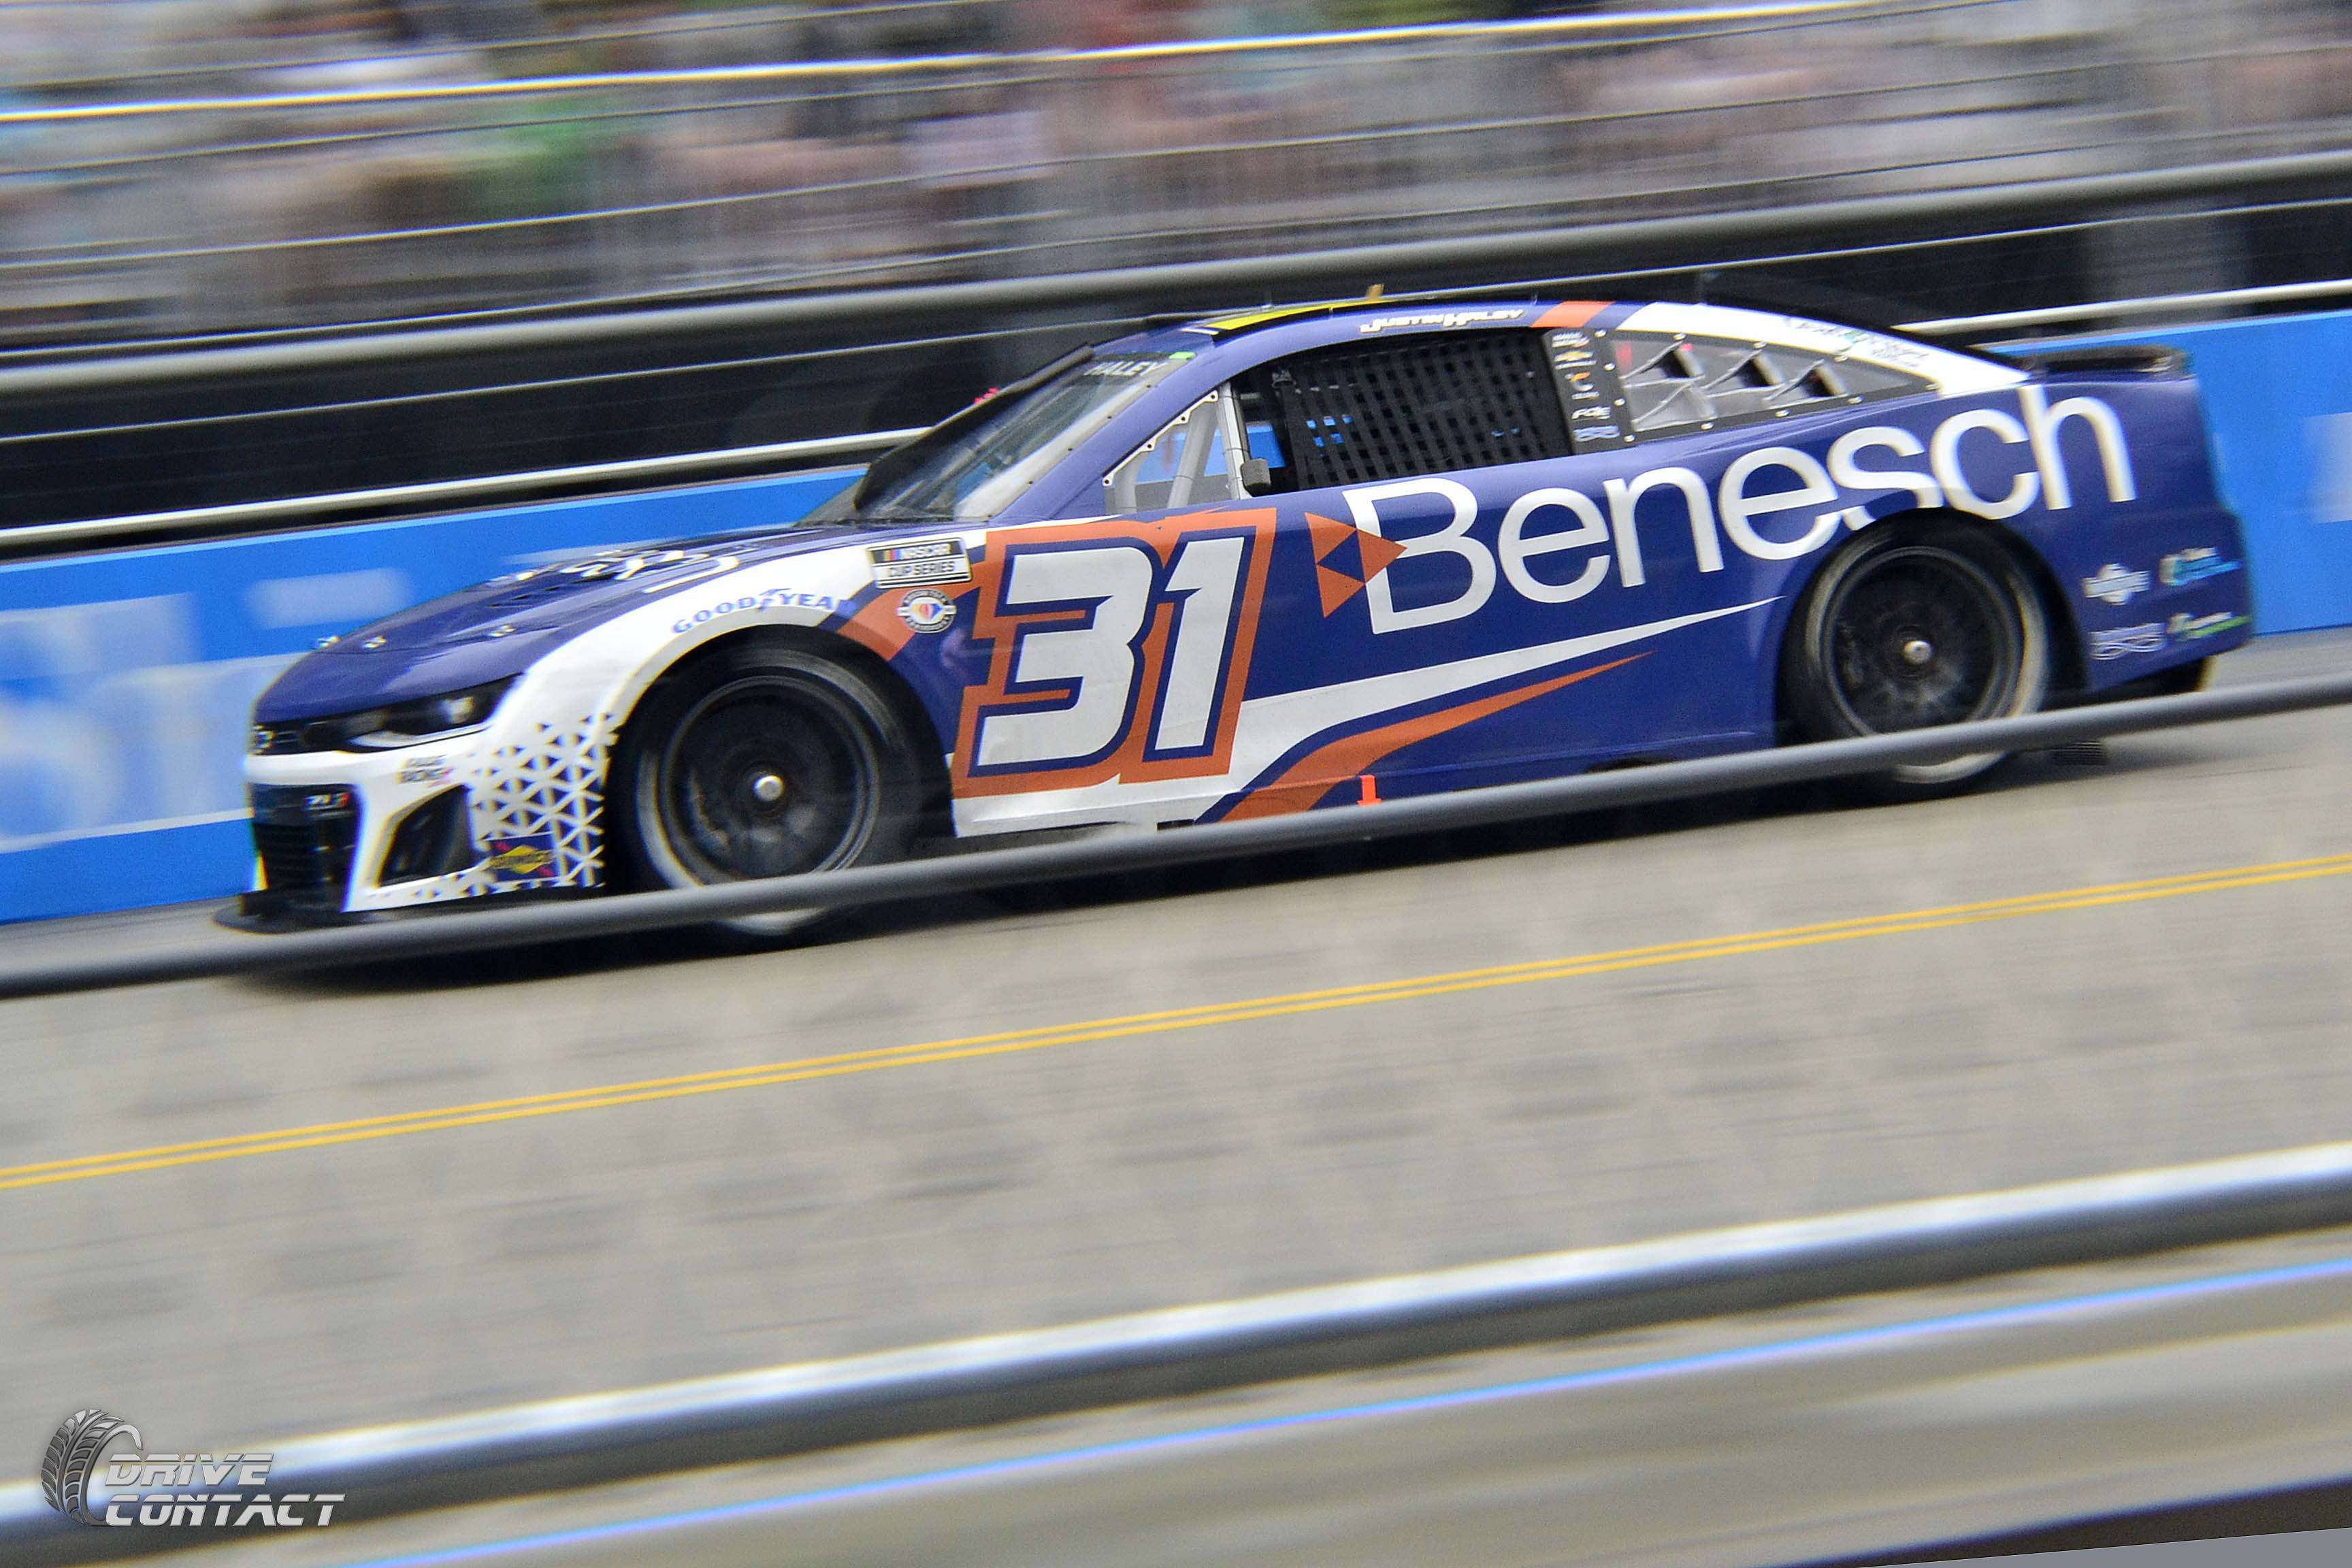 Justin Haley will drive the No. 31 Benesch Law Chevrolet